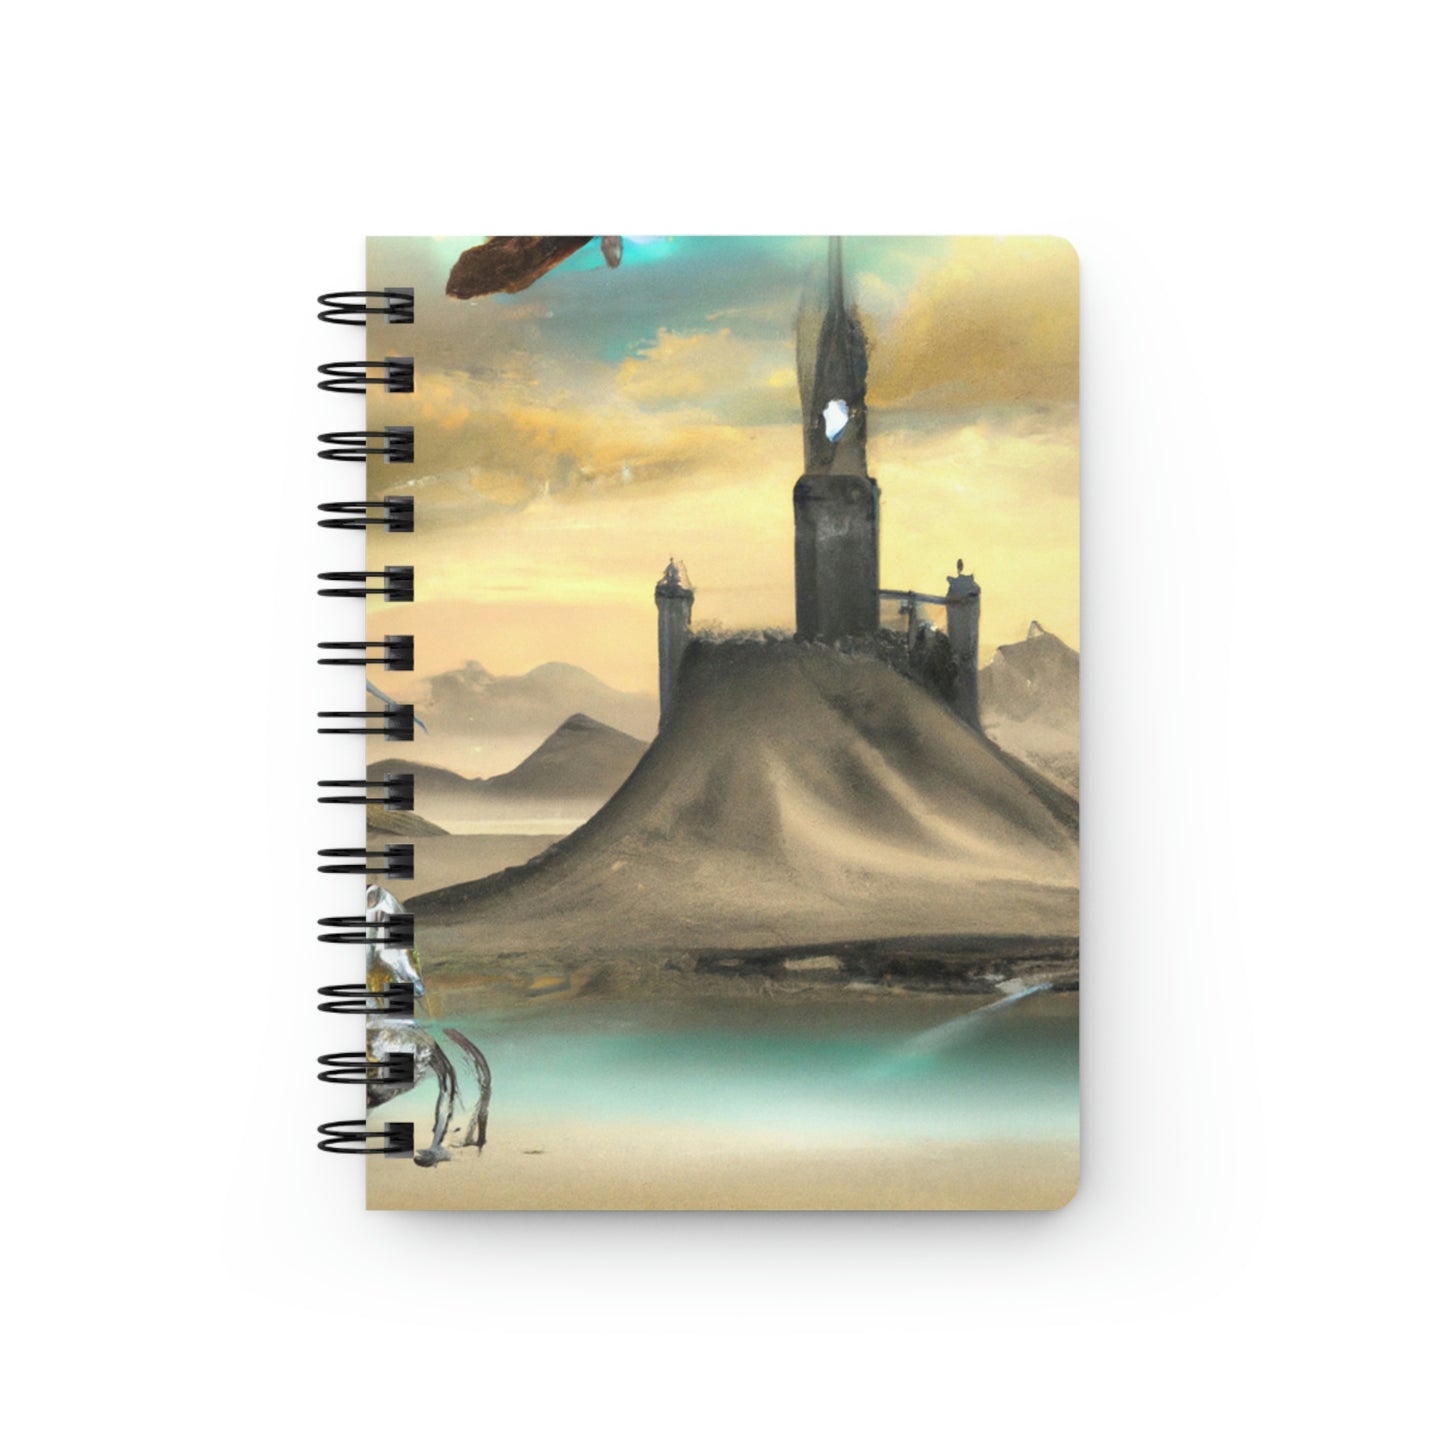 The Knight and the Dragon's Throne - The Alien Spiral Bound Journal